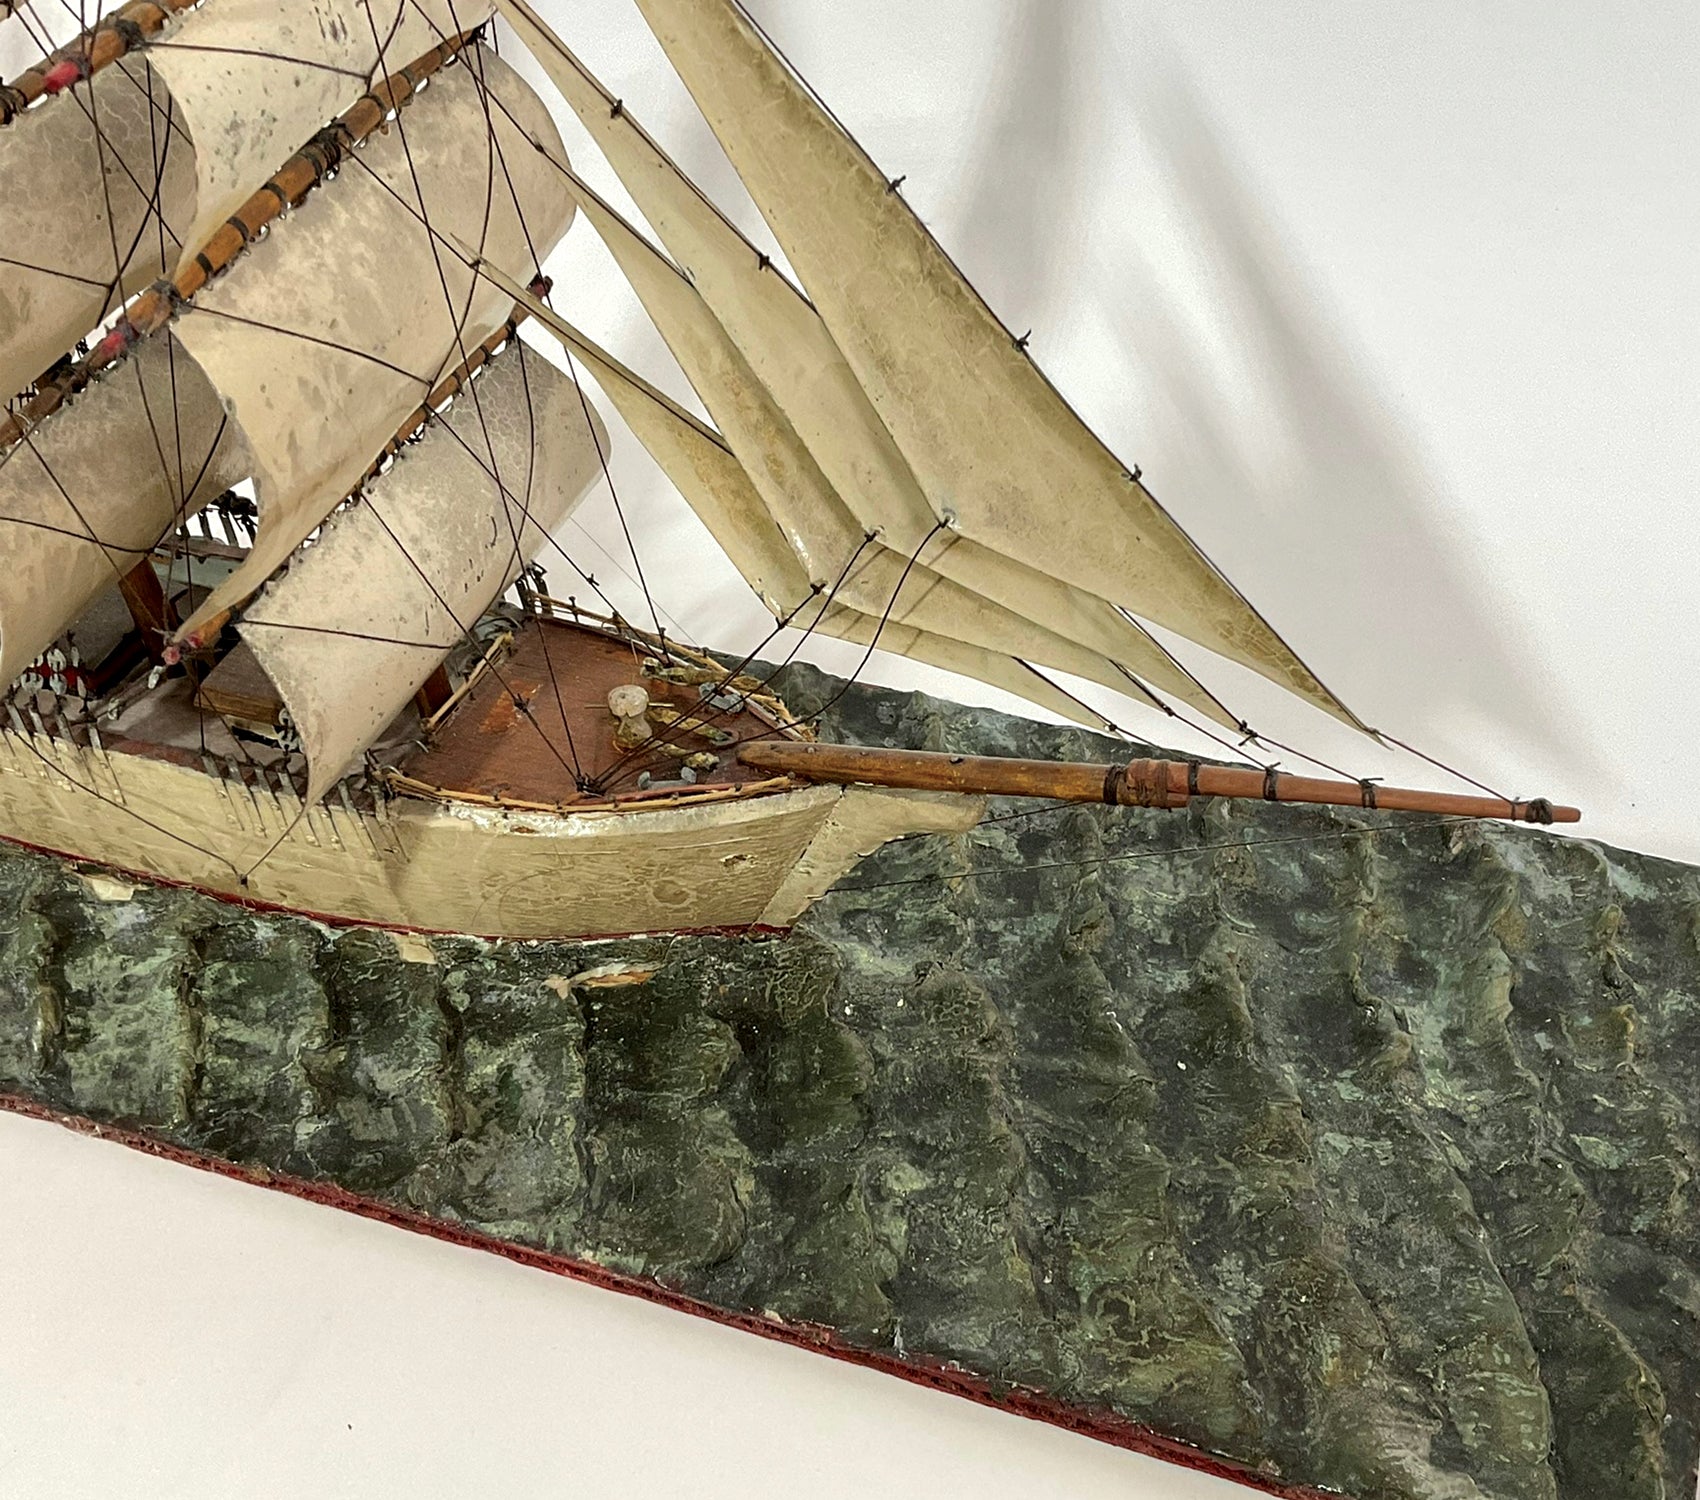 Ship Model Of A Four Masted Barque - Lannan Gallery